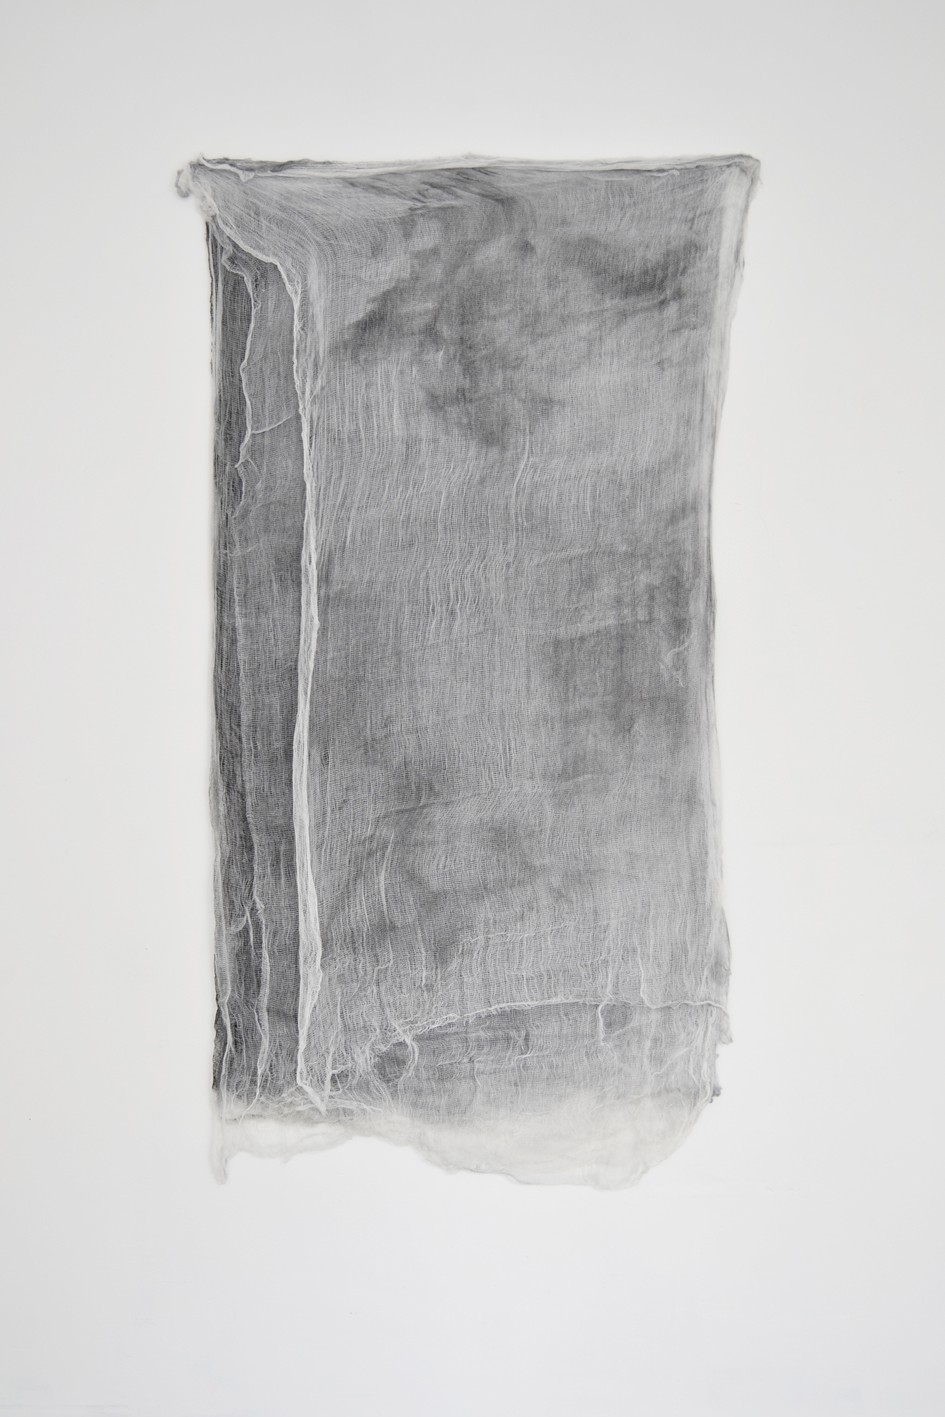 Alessandro Moroder - Ten Sheets Of Used Cloth - 2015